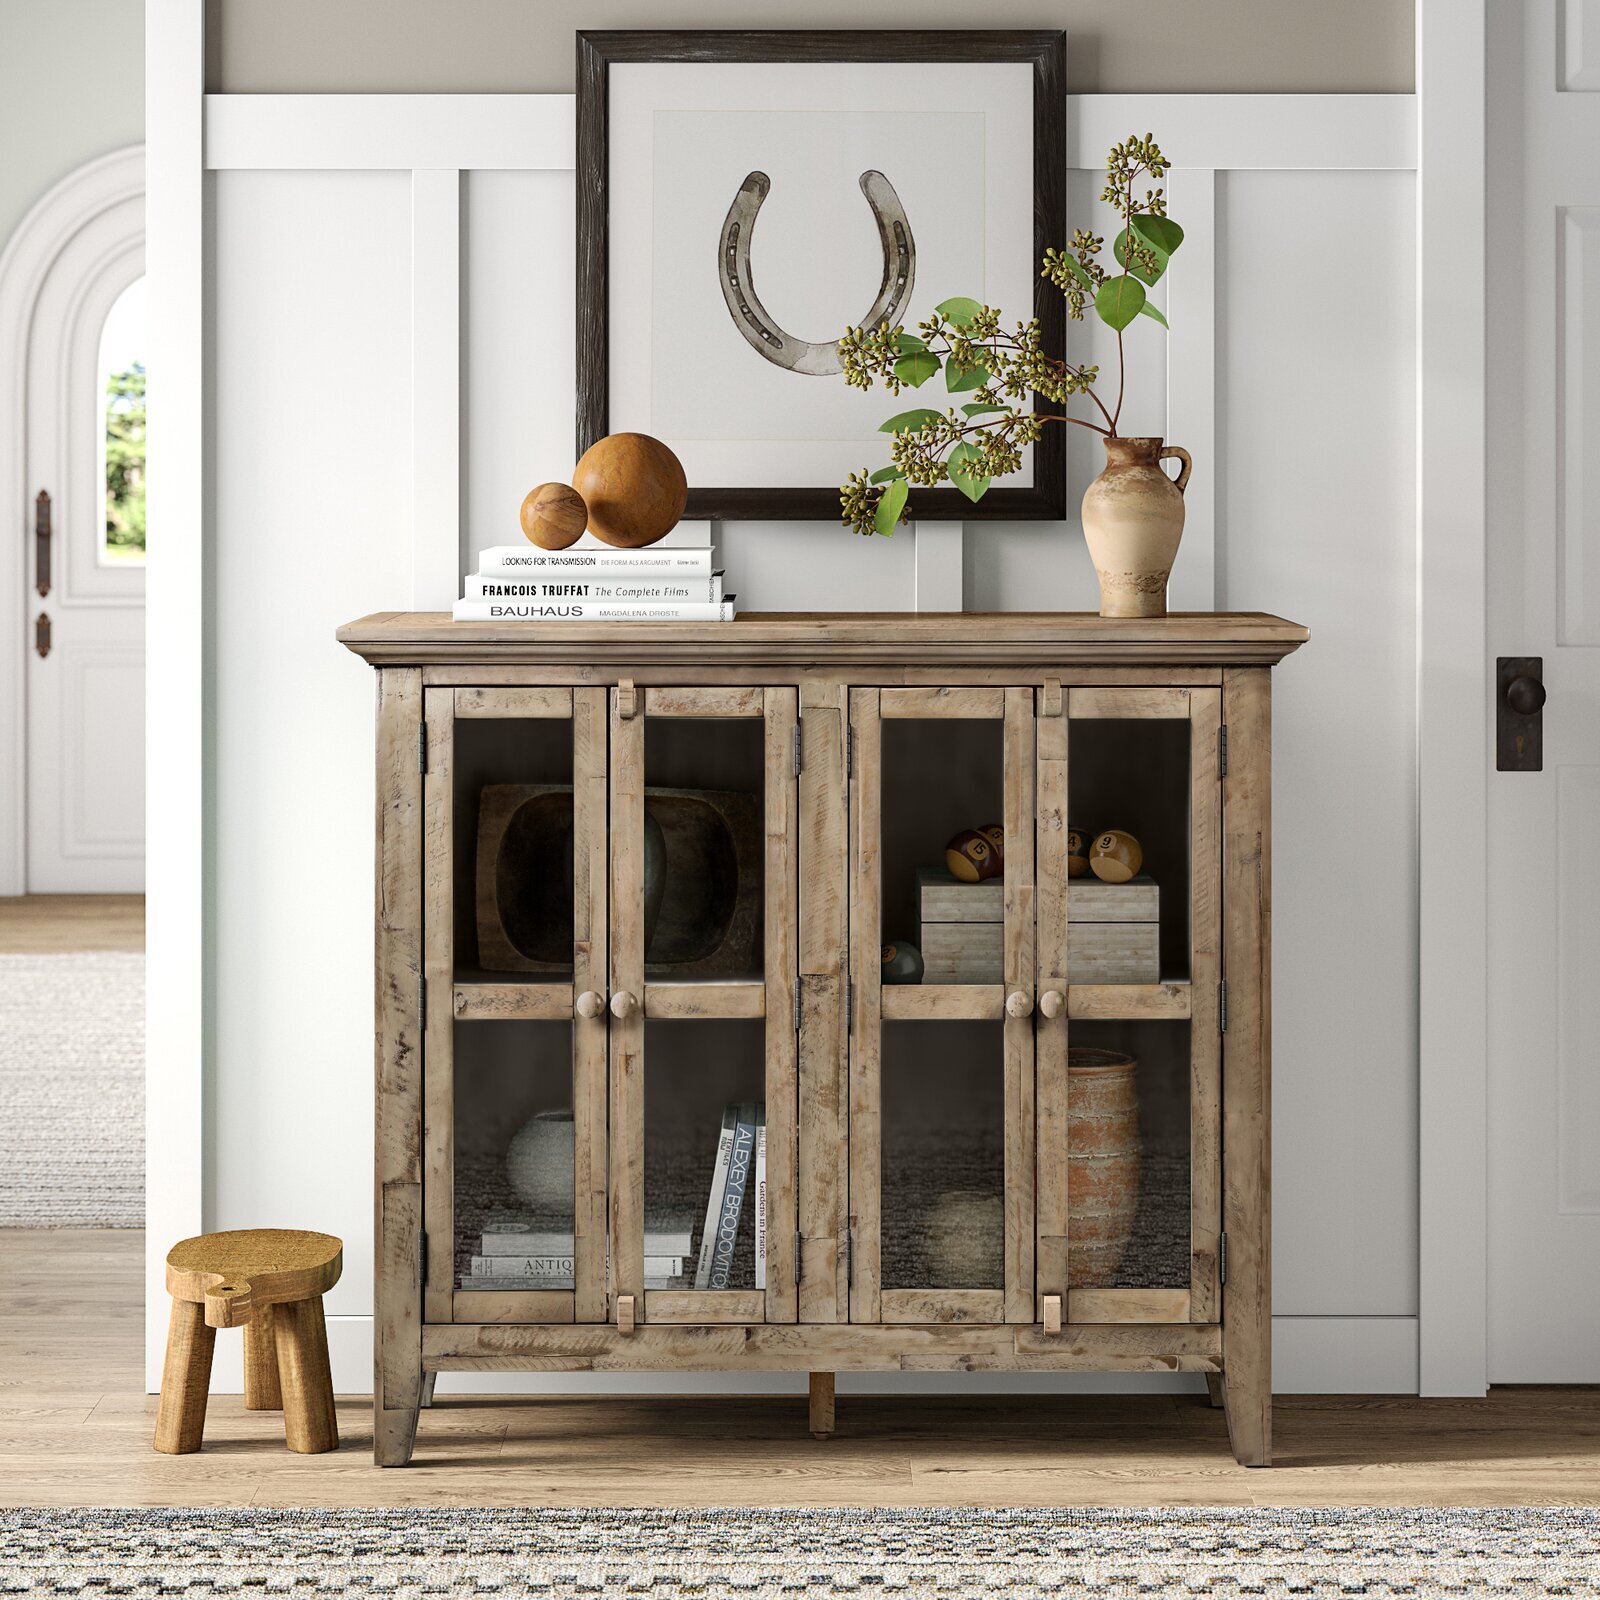 A farmhouse found wood cabinet with glass framed doors